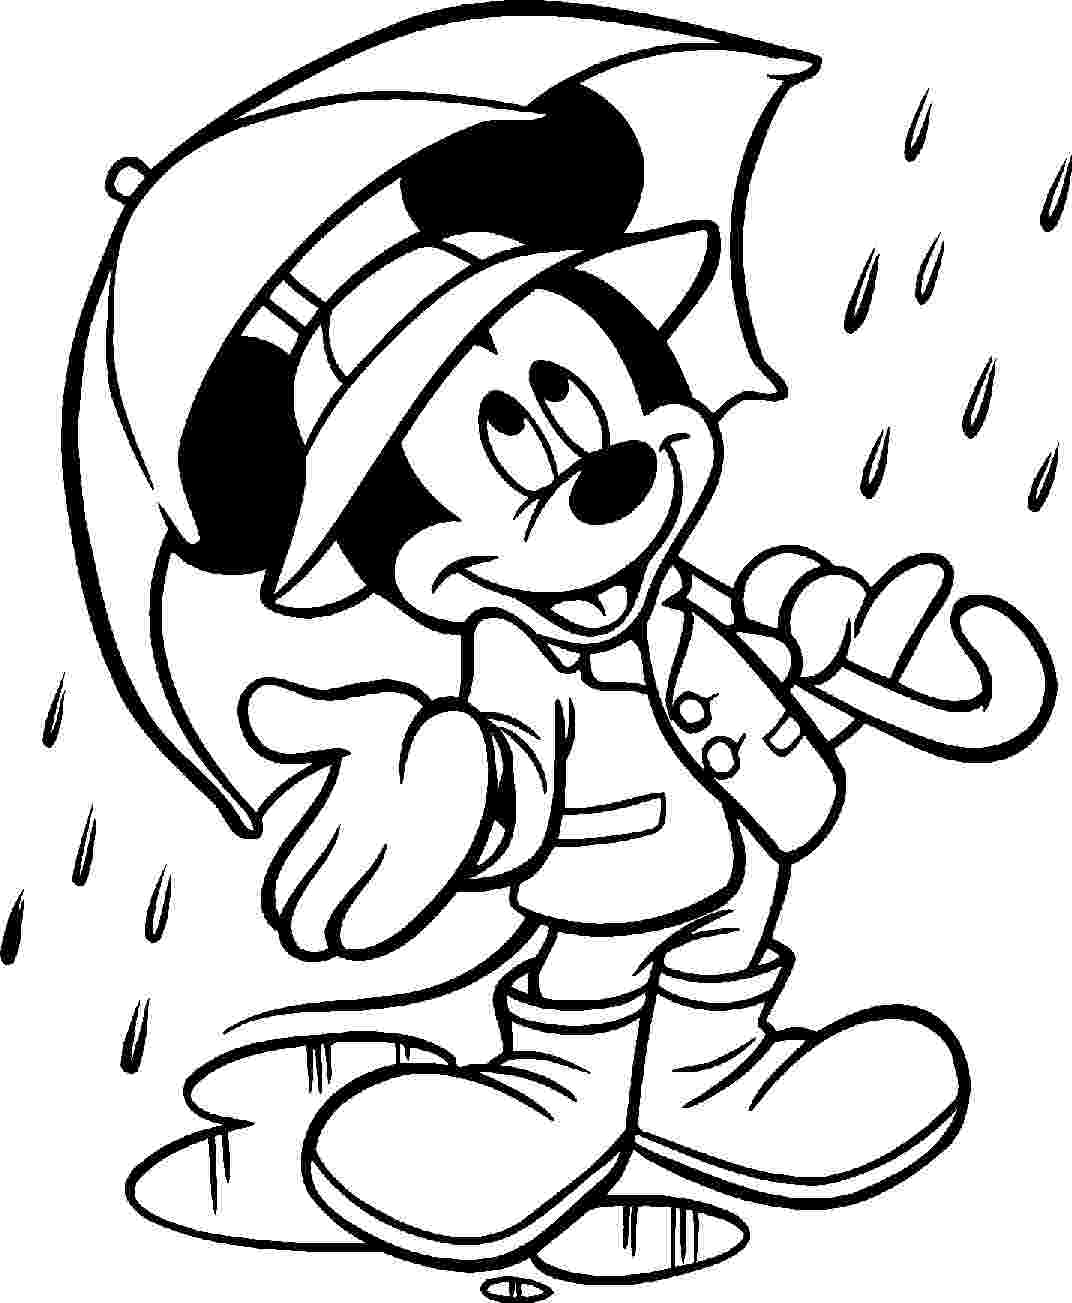 mickey mouse coloring page mickey mouse coloring pages 13 disney39s world of wonders mouse page mickey coloring 